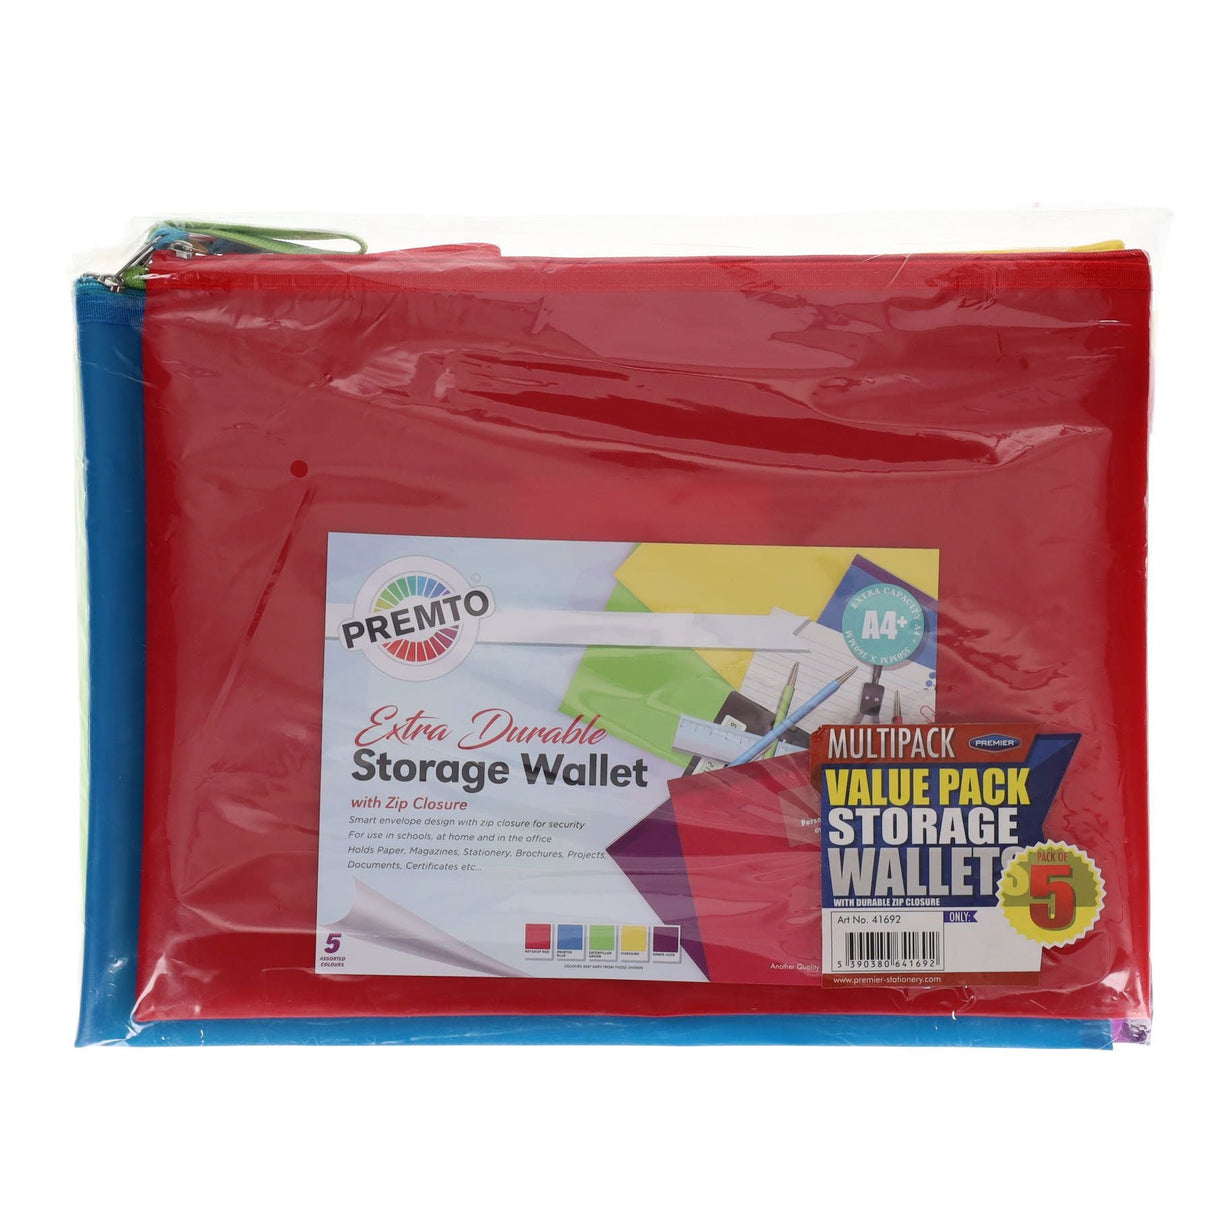 Premto A4+ Extra Durable Storage Wallets - Ice S1 - Pack of 5 | Stationery Shop UK